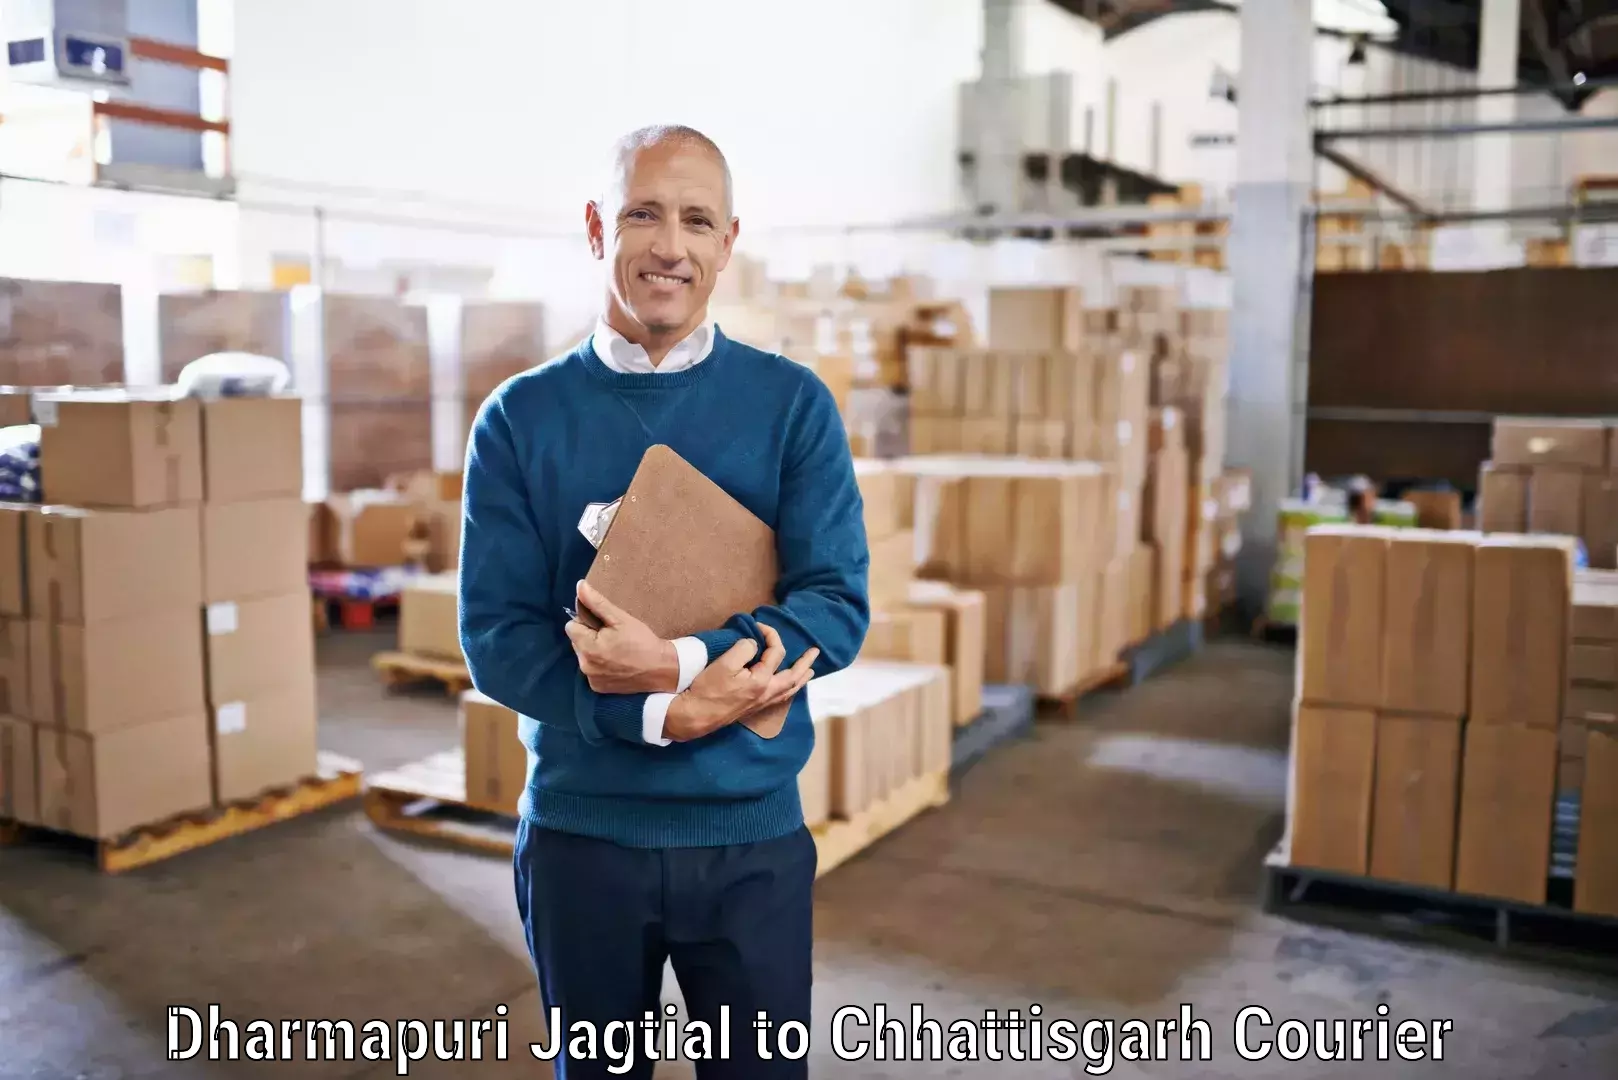 Quality courier services Dharmapuri Jagtial to Dhamtari